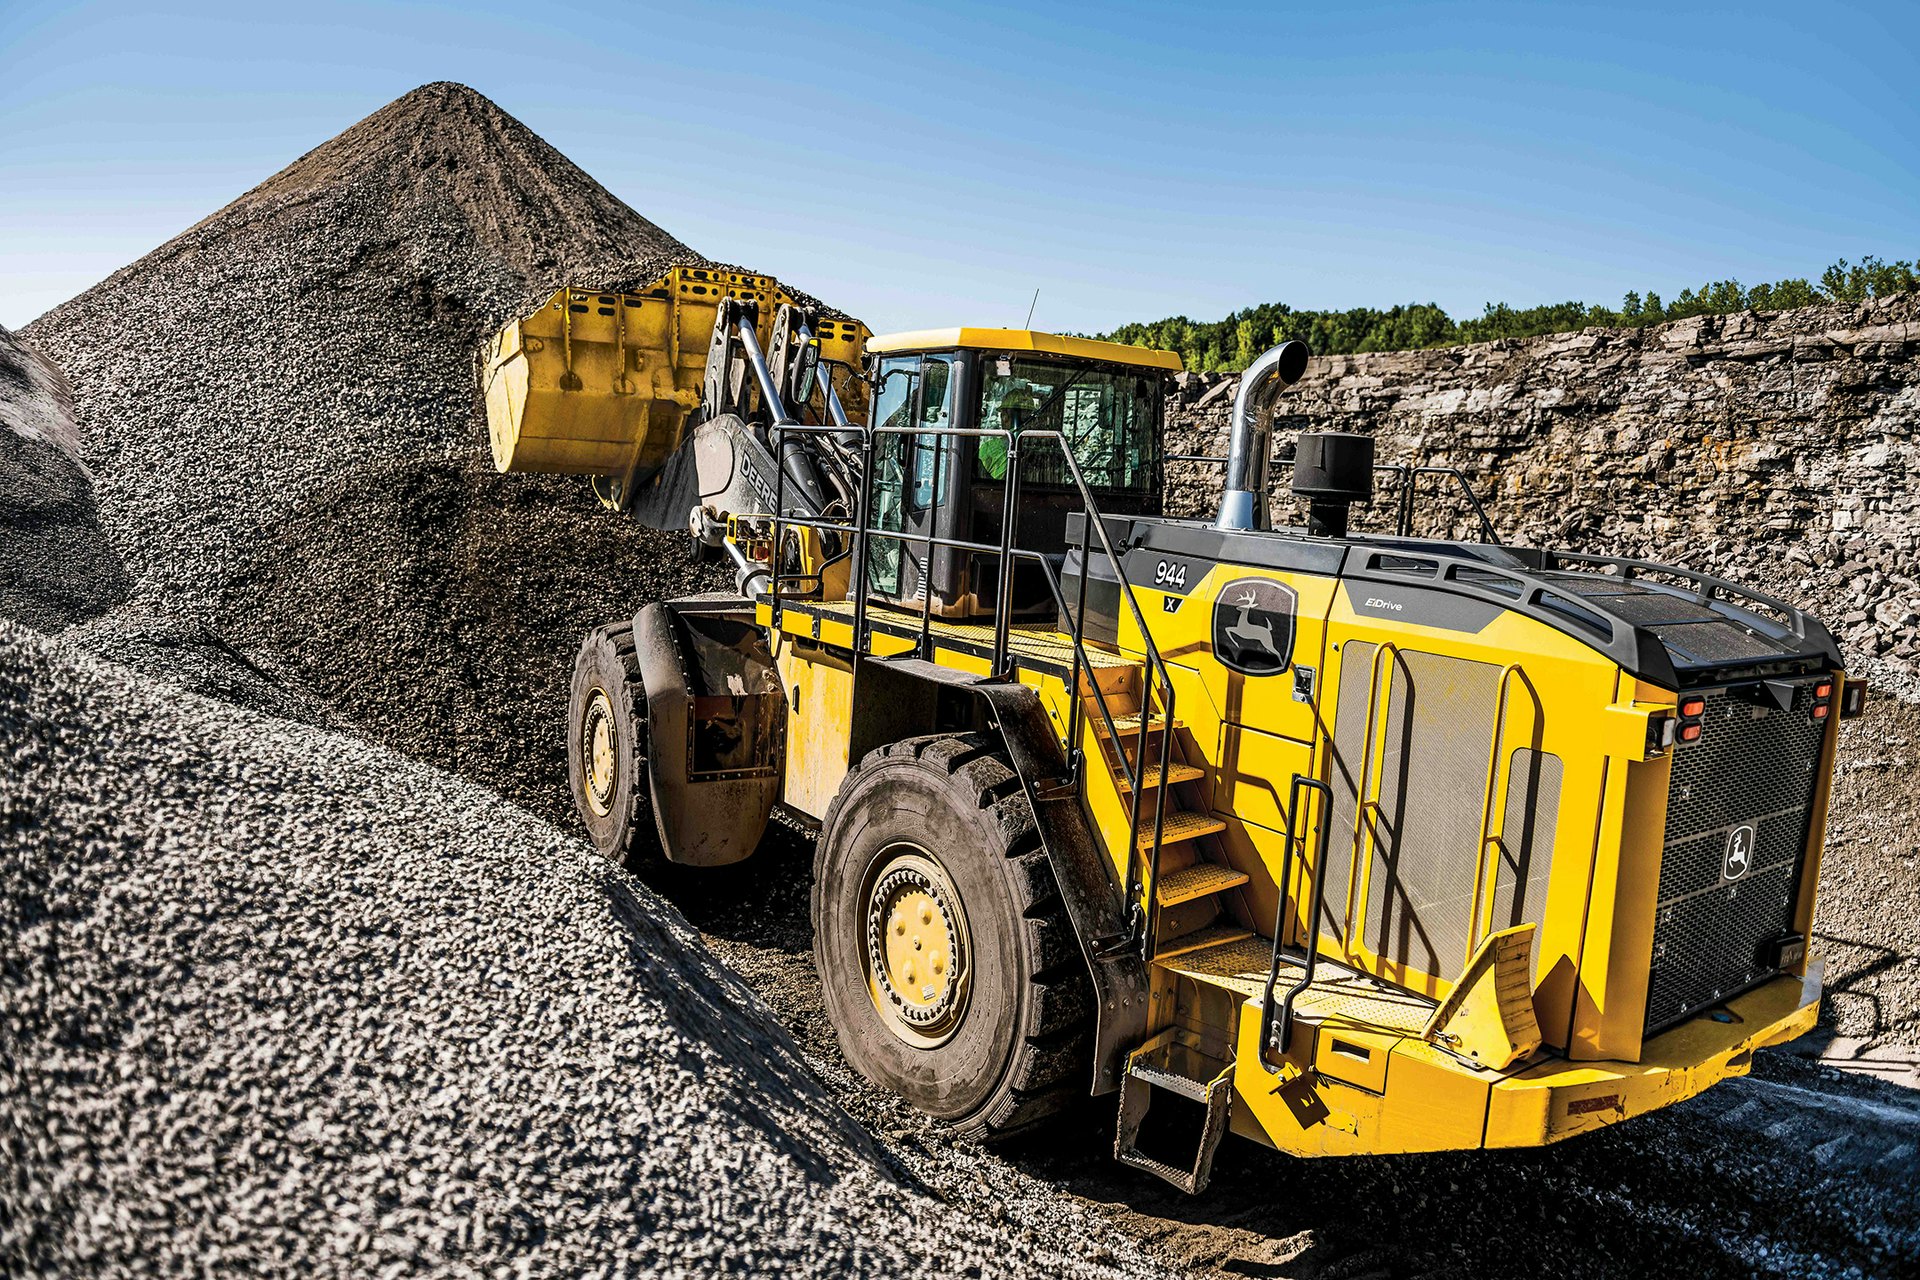 John Deere will highlight three E-Power (battery-electric) machines, including the 310 X-Tier backhoe, the 244 X-Tier compact wheel loader and the 145 X-Tier excavator concept.